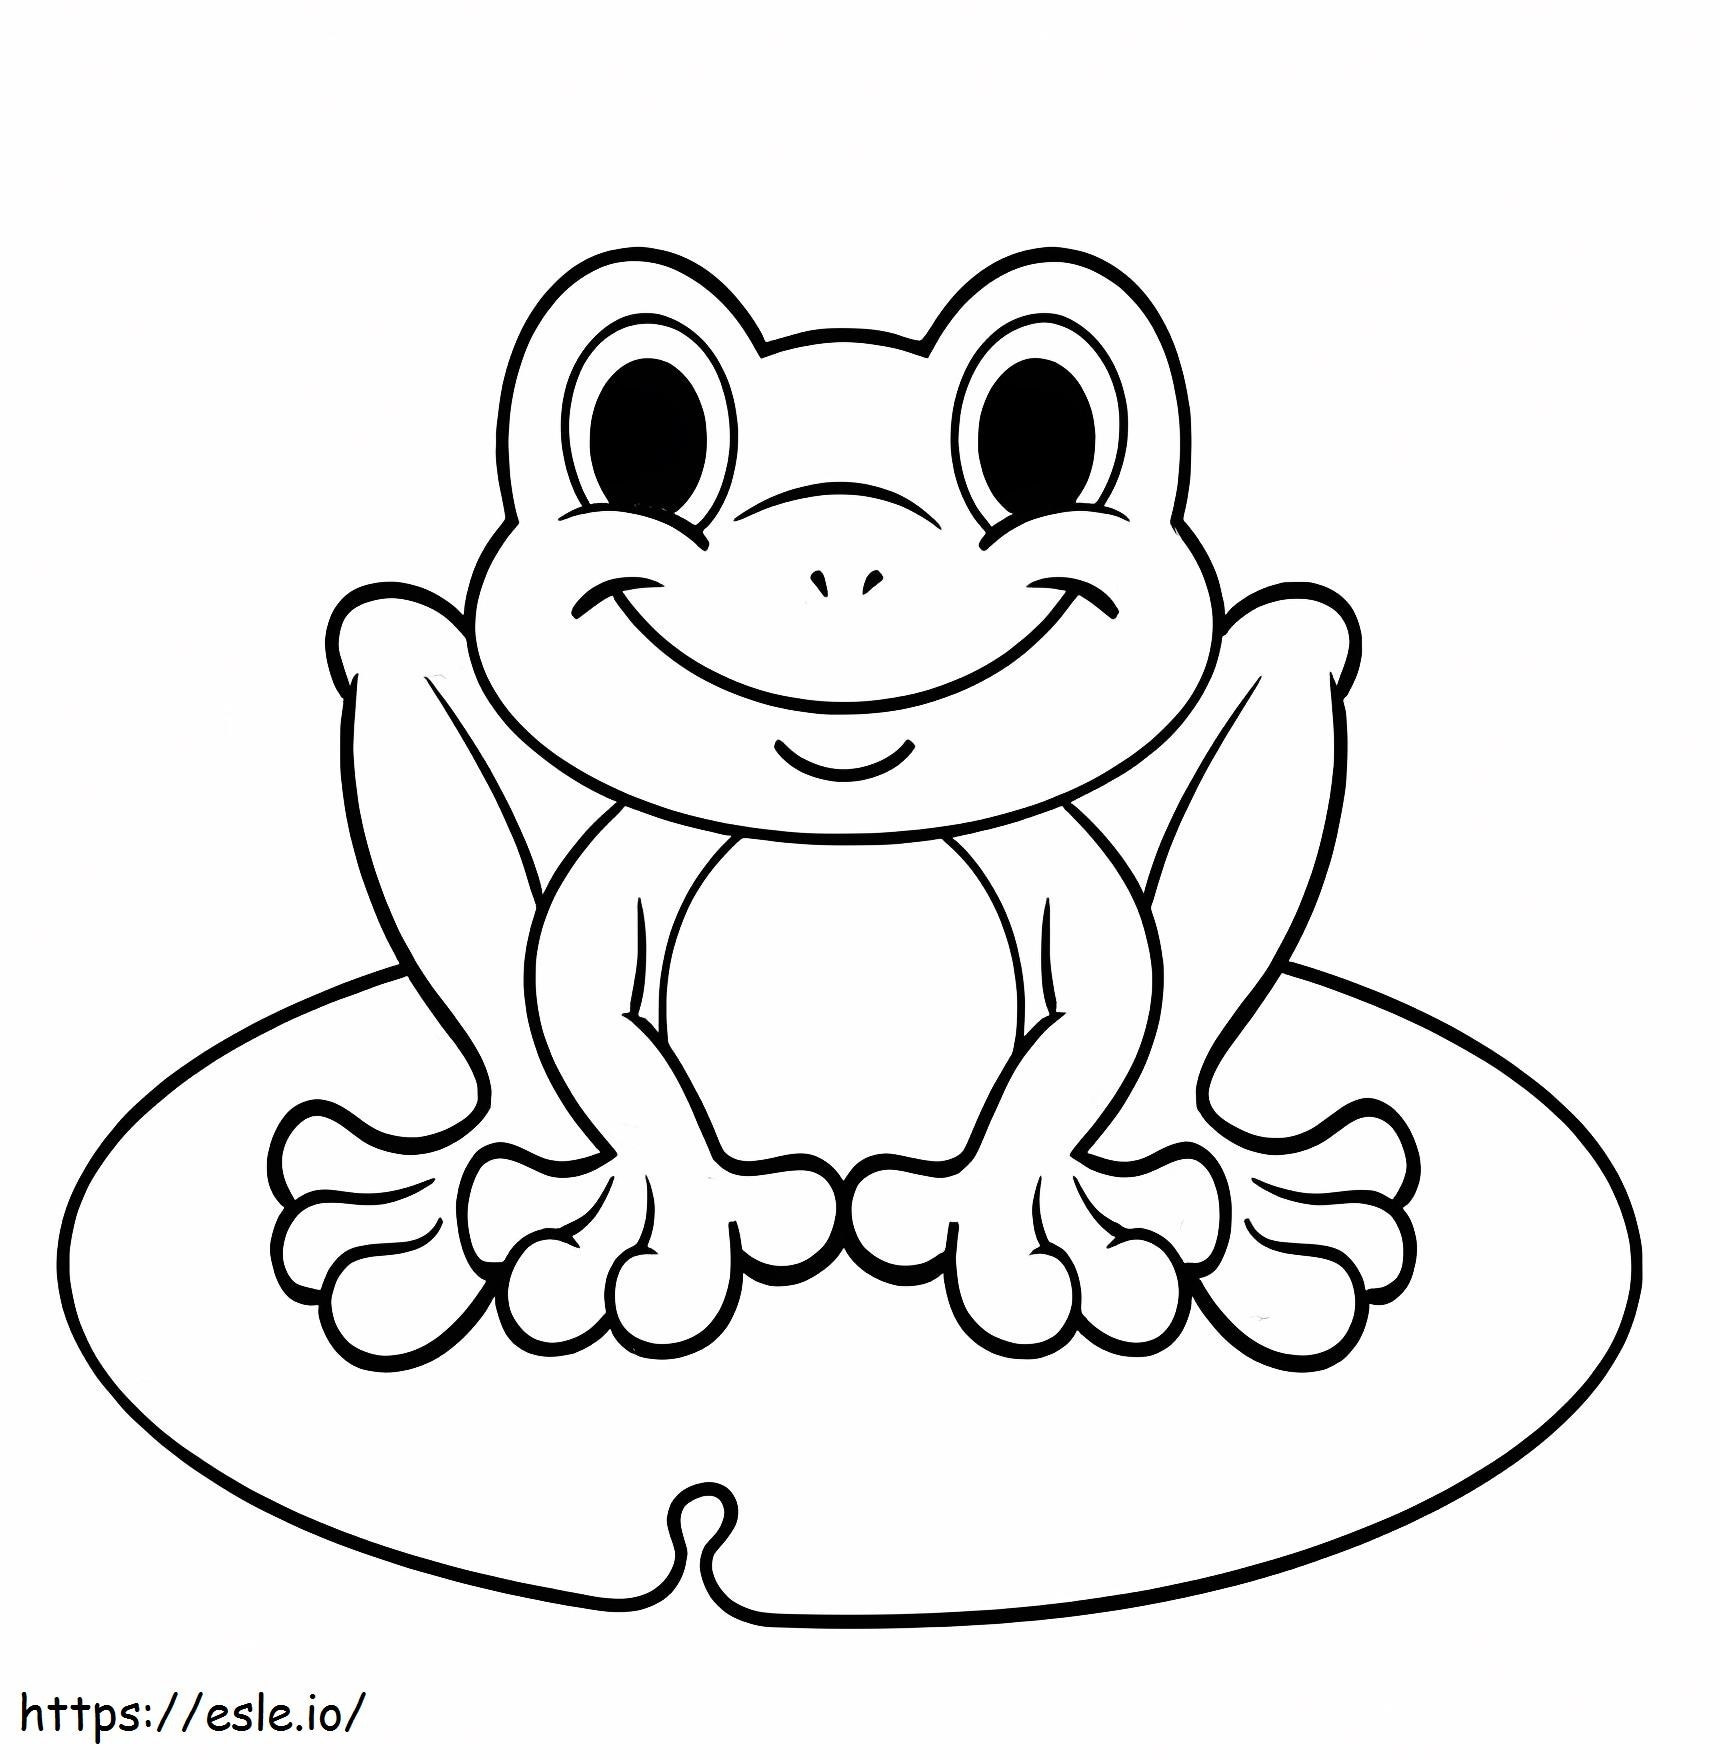 Smiling Frog Sitting On The Leaf coloring page